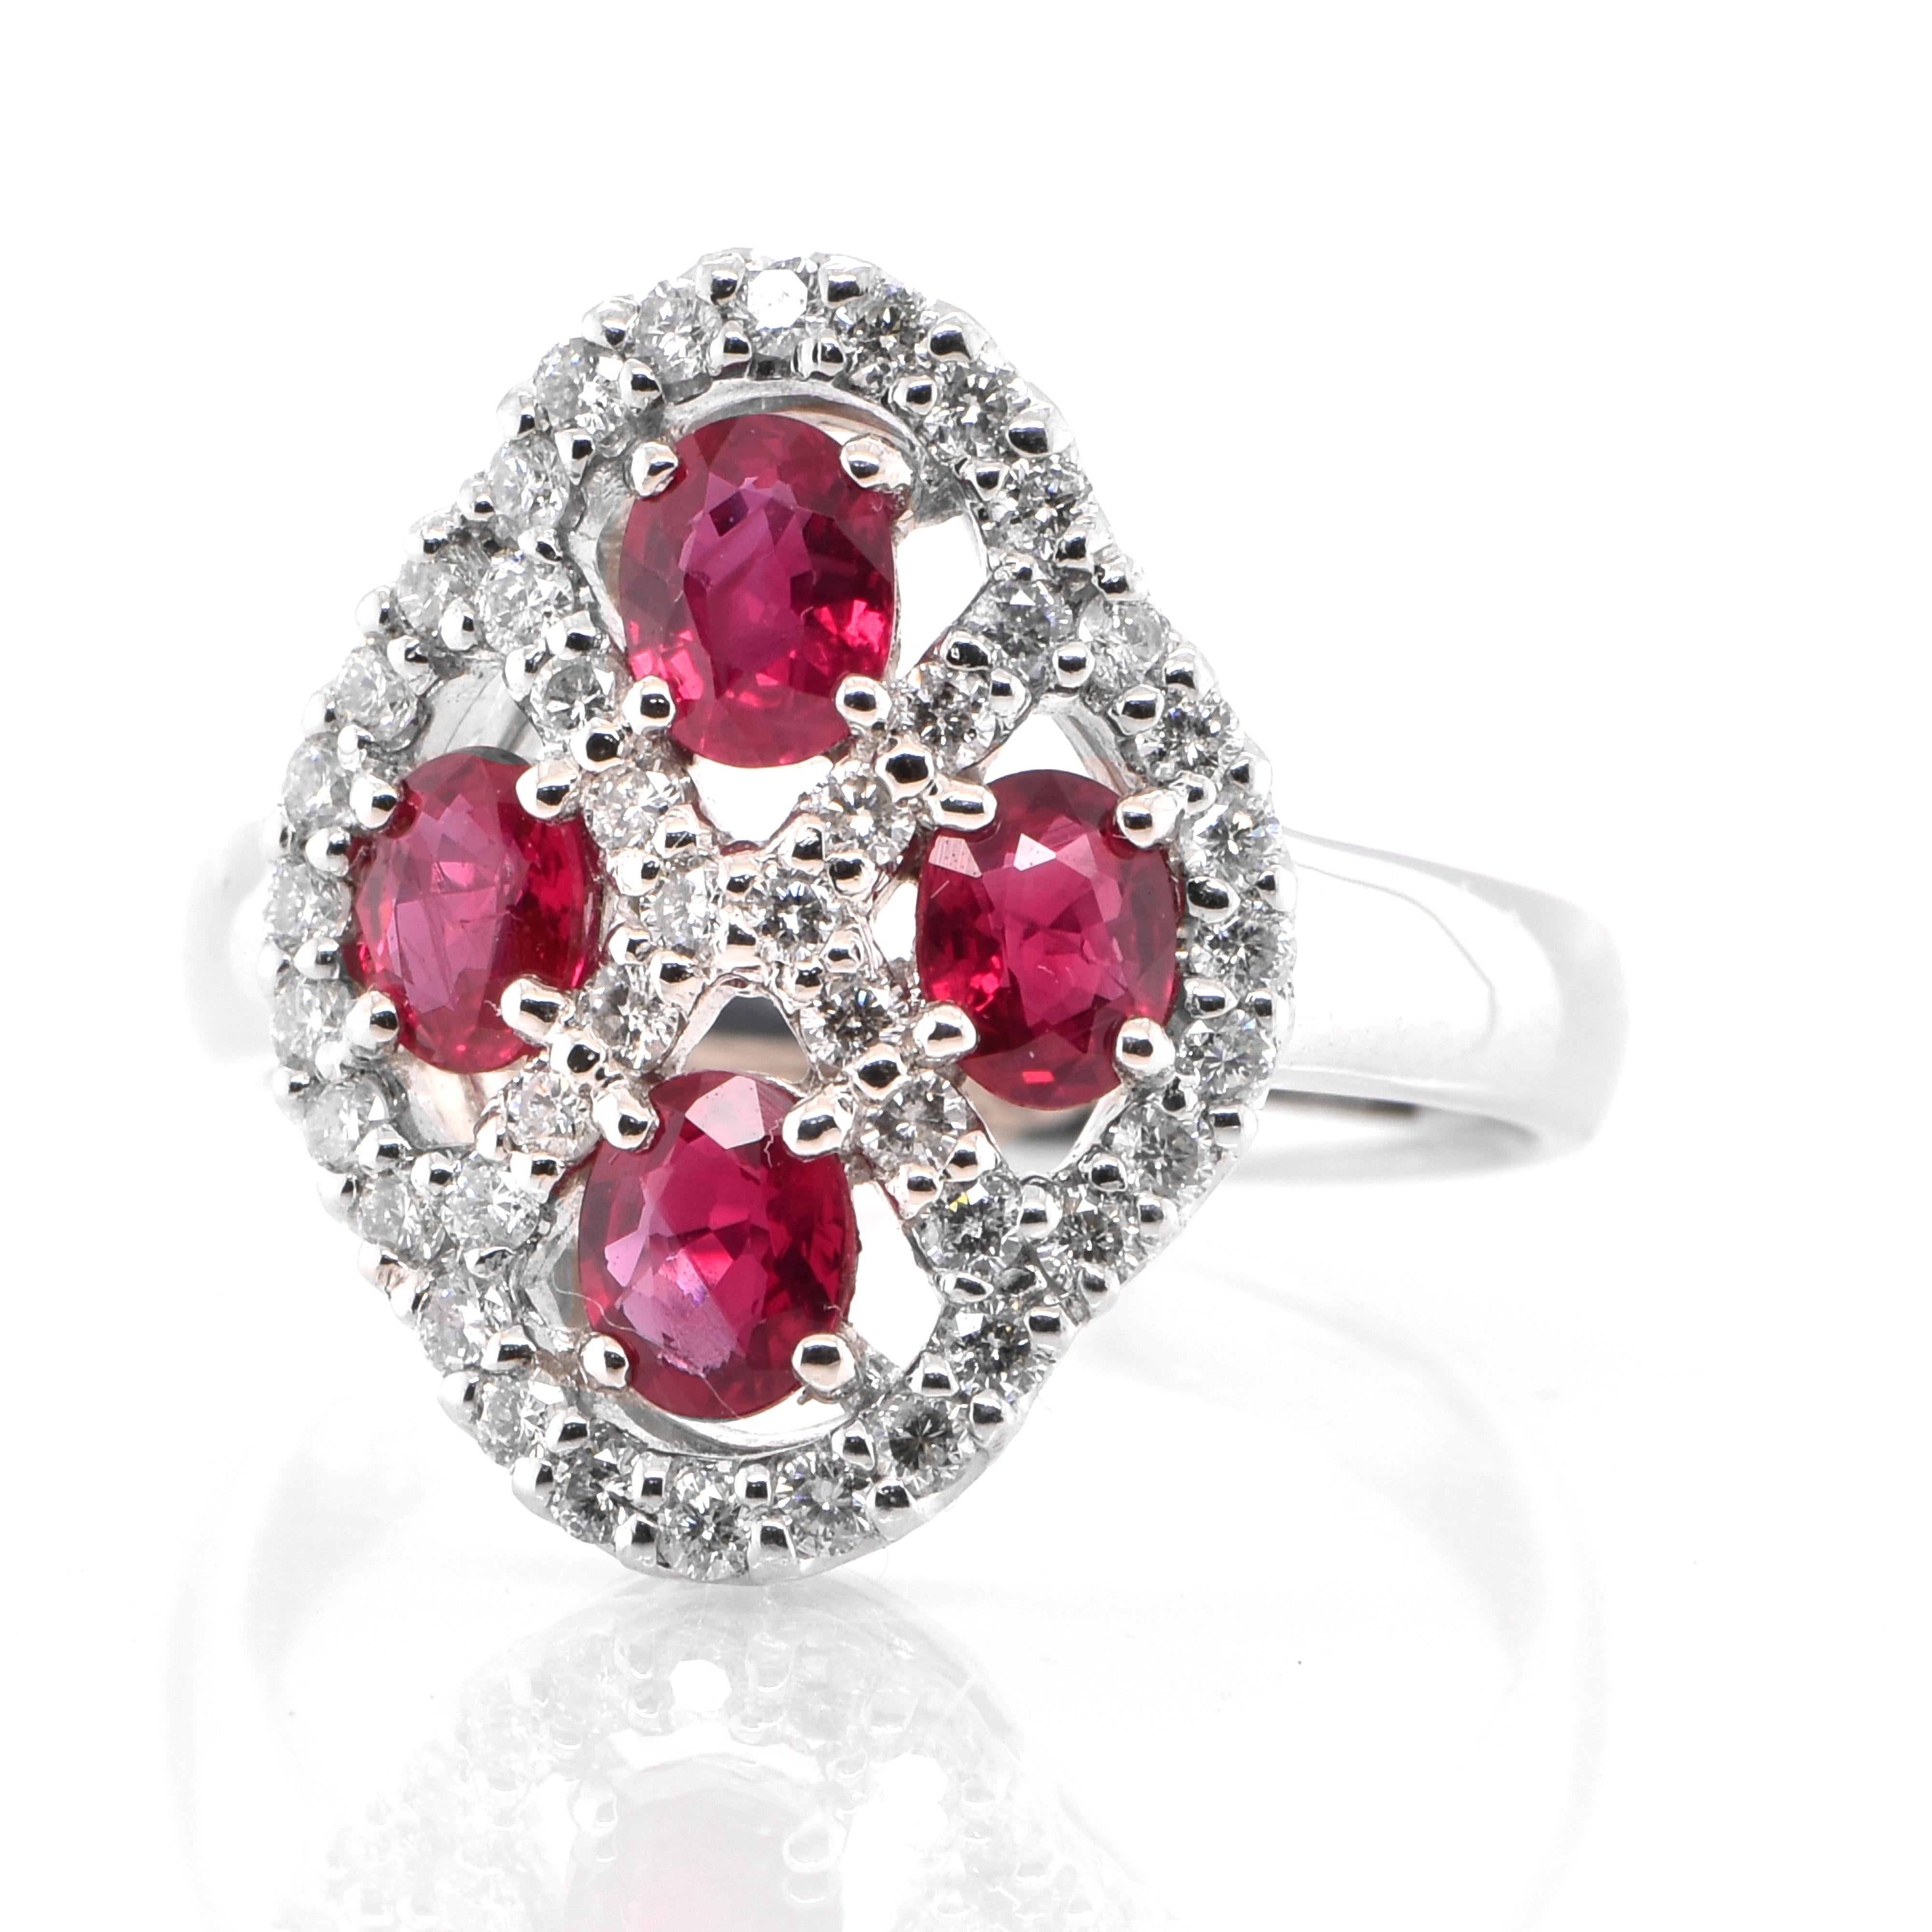 A beautiful Cocktail Ring set in Platinum featuring a total 1.34 Carat Natural Rubies and 0.50 Carats of Diamond Accents. Rubies are referred to as 